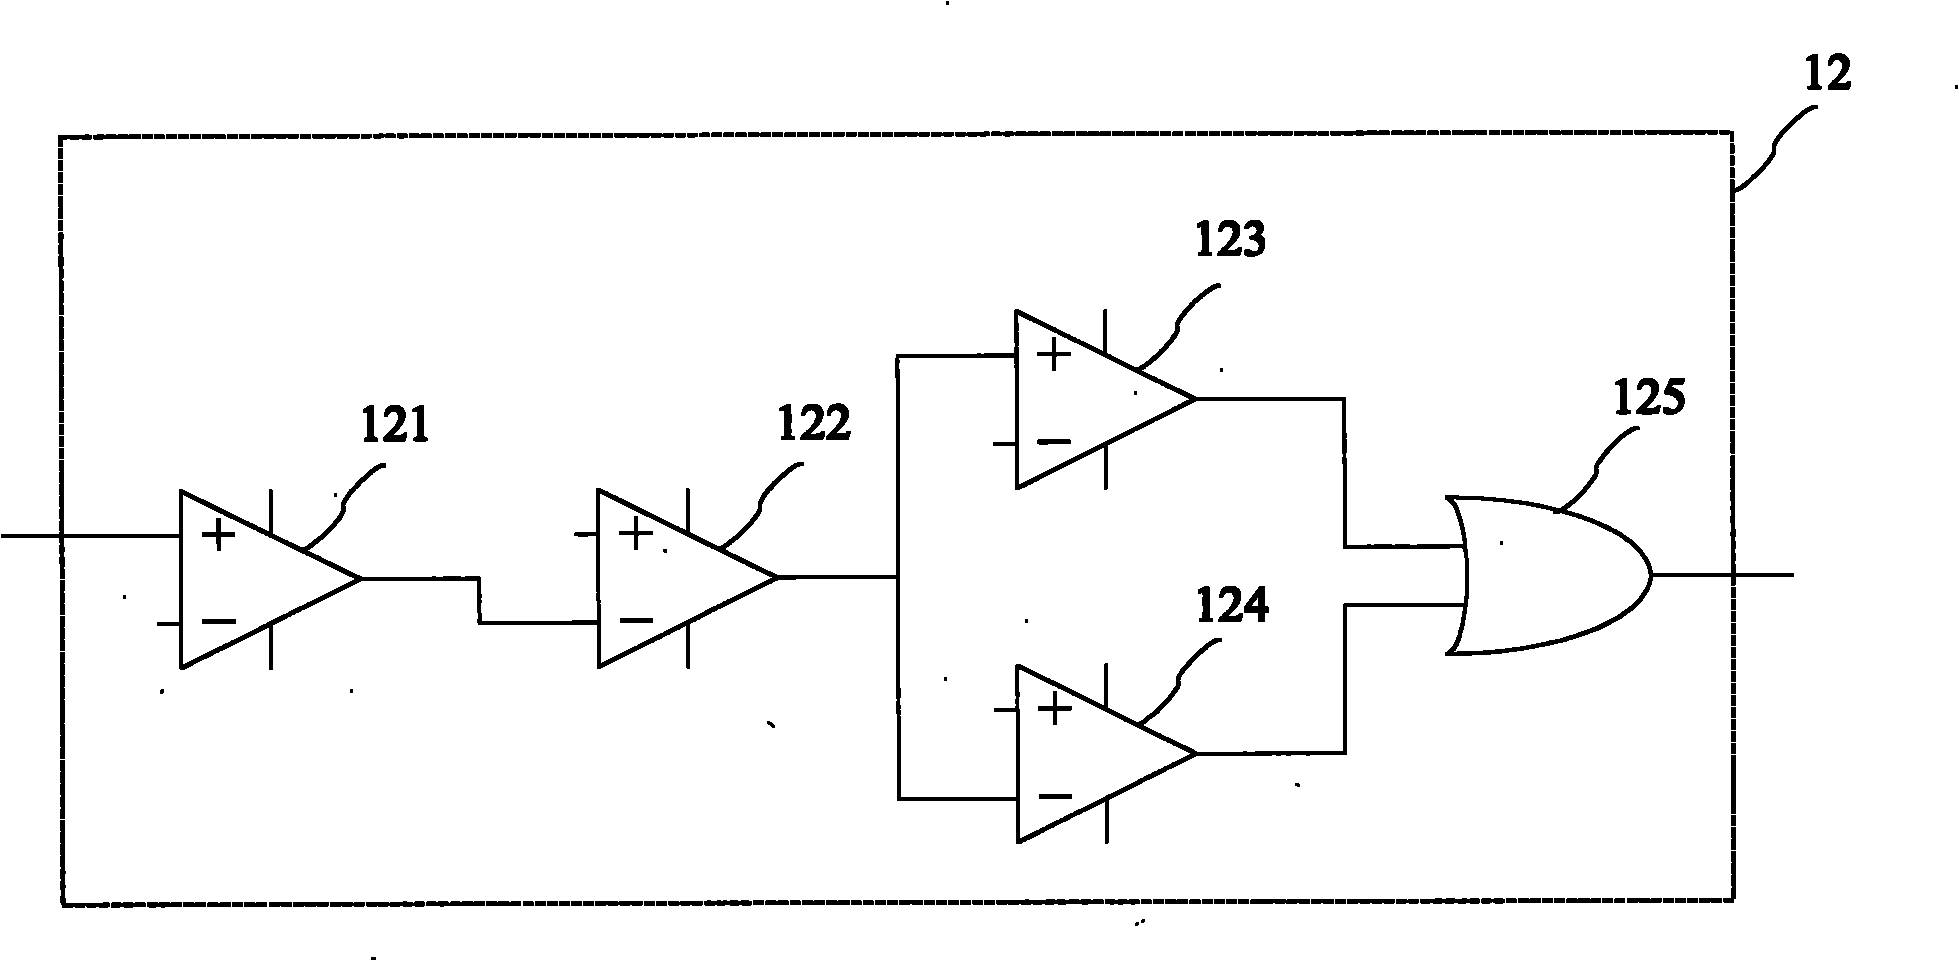 Person number detection device and method